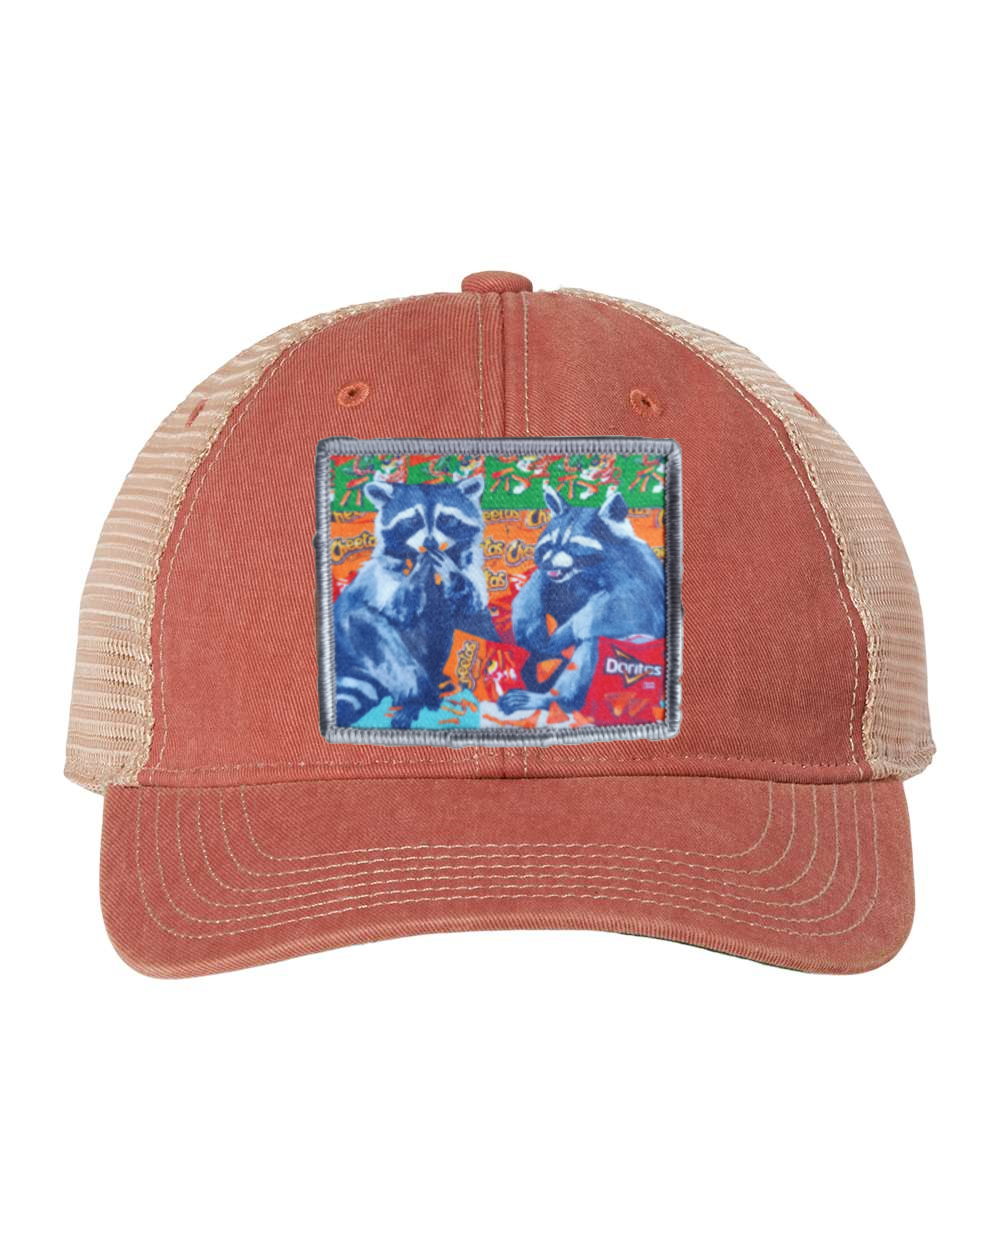 Nantucket Red Unstructured Hats Flyn Costello Junkfood Bandits  